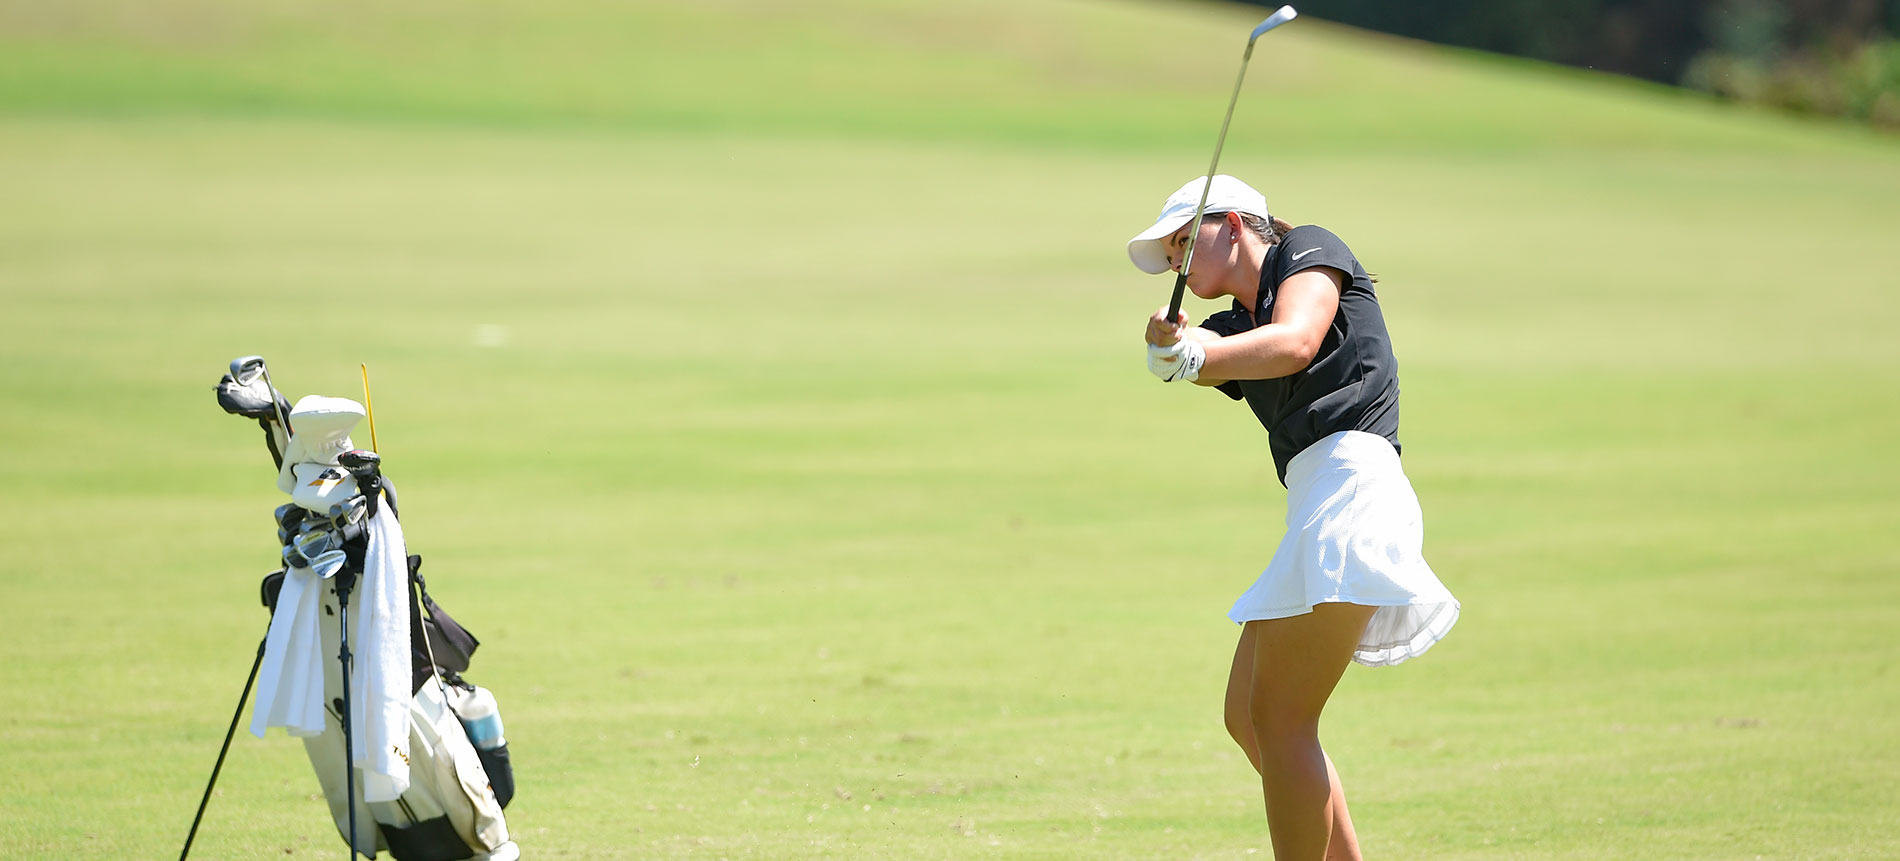 Women’s Golf Tied for Seventh Place Following Opening Round of Battle at Hilton Head